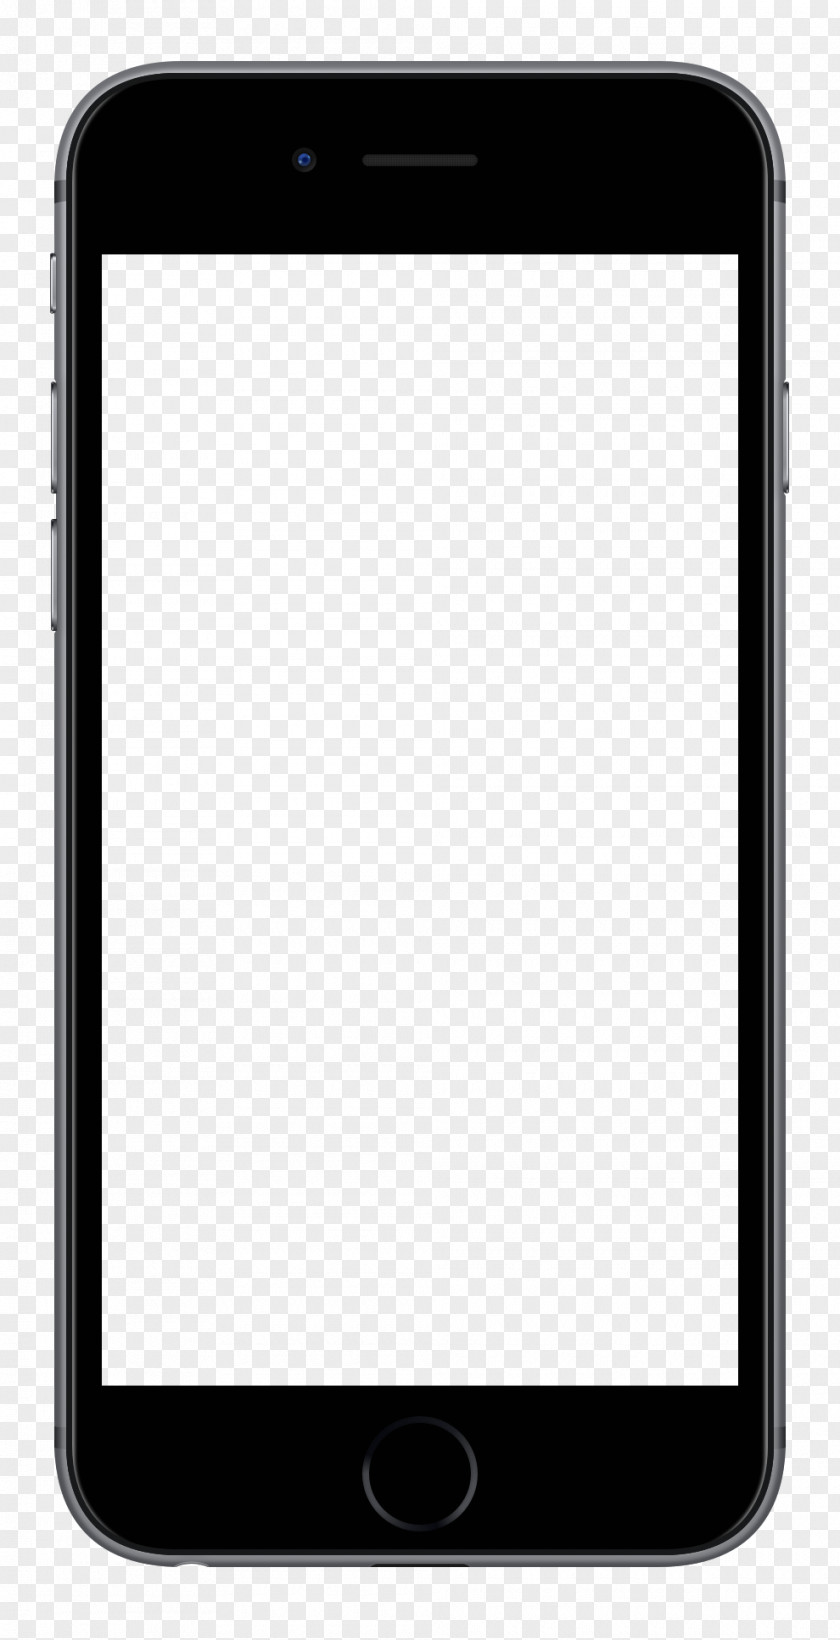 Mobile App IPhone 5s 4S 7 PNG